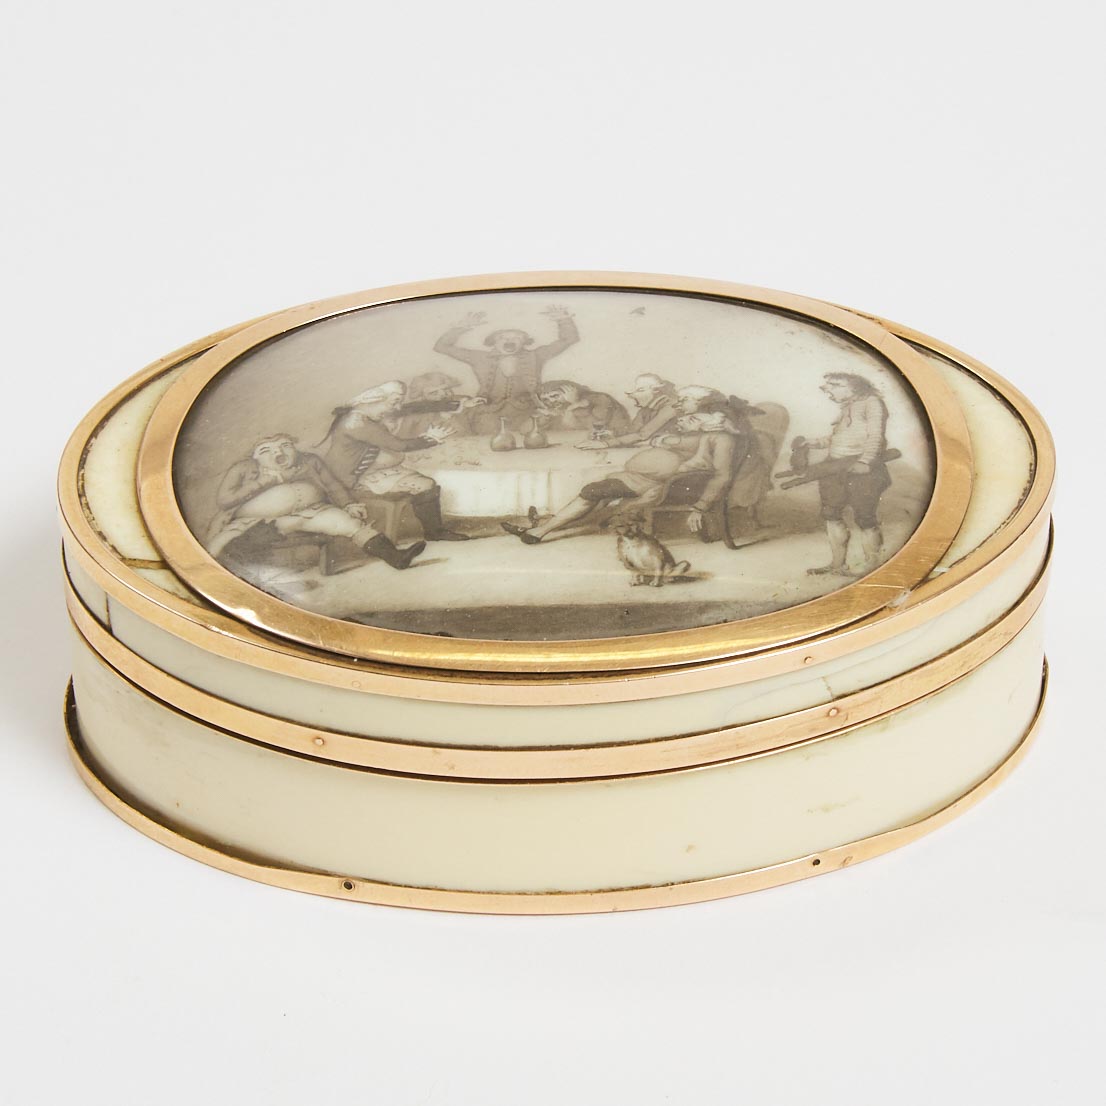 Gold Mounted Ivory Oval Pictorial Snuff Box, late 18th century